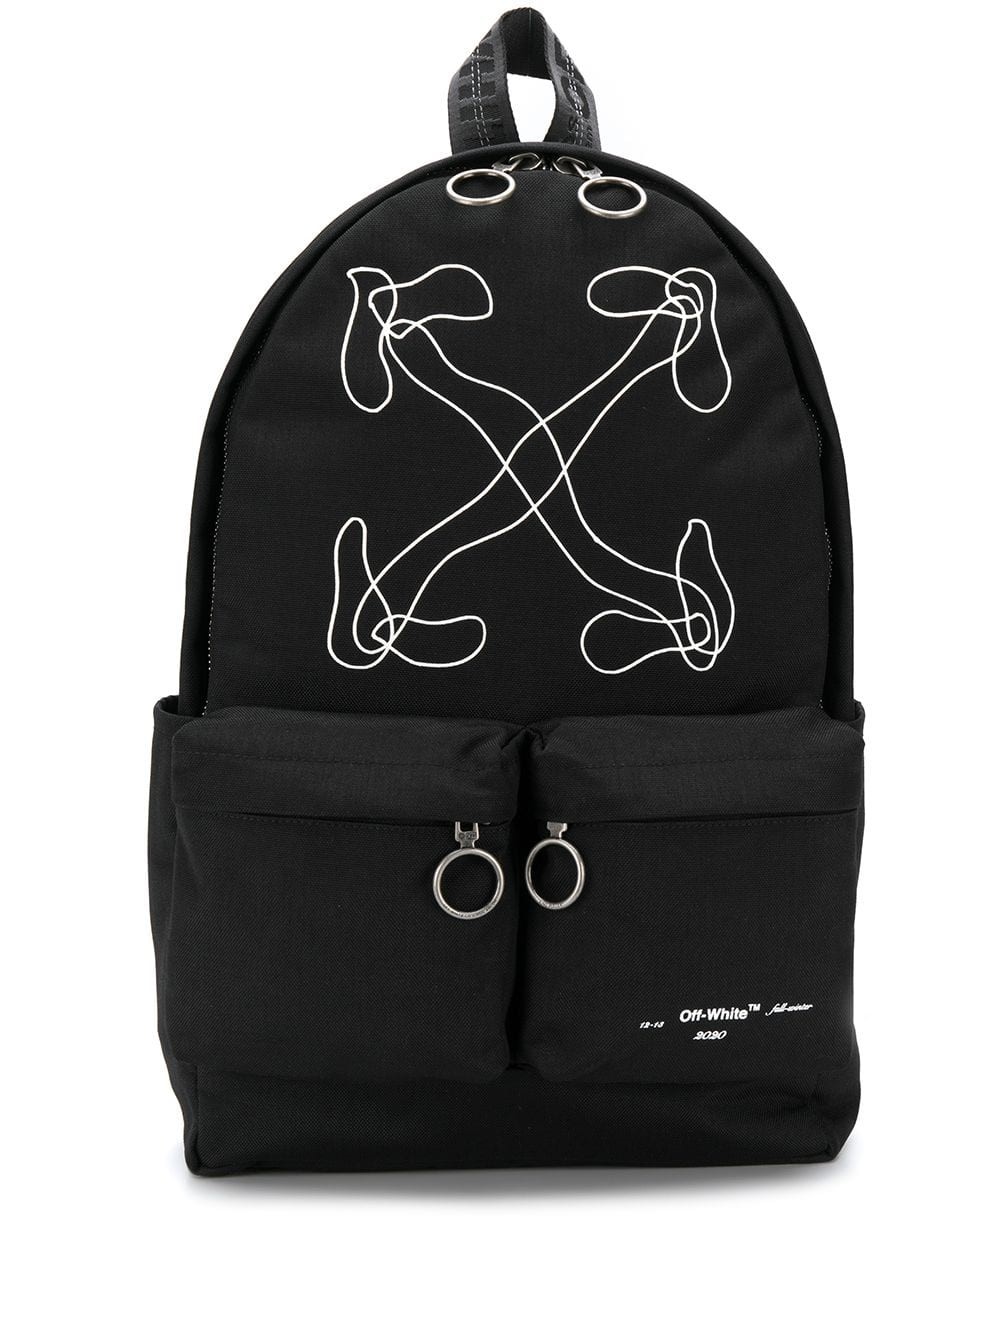 off-white ABSTRACT BACKPACK available on montiboutique.com - 31220